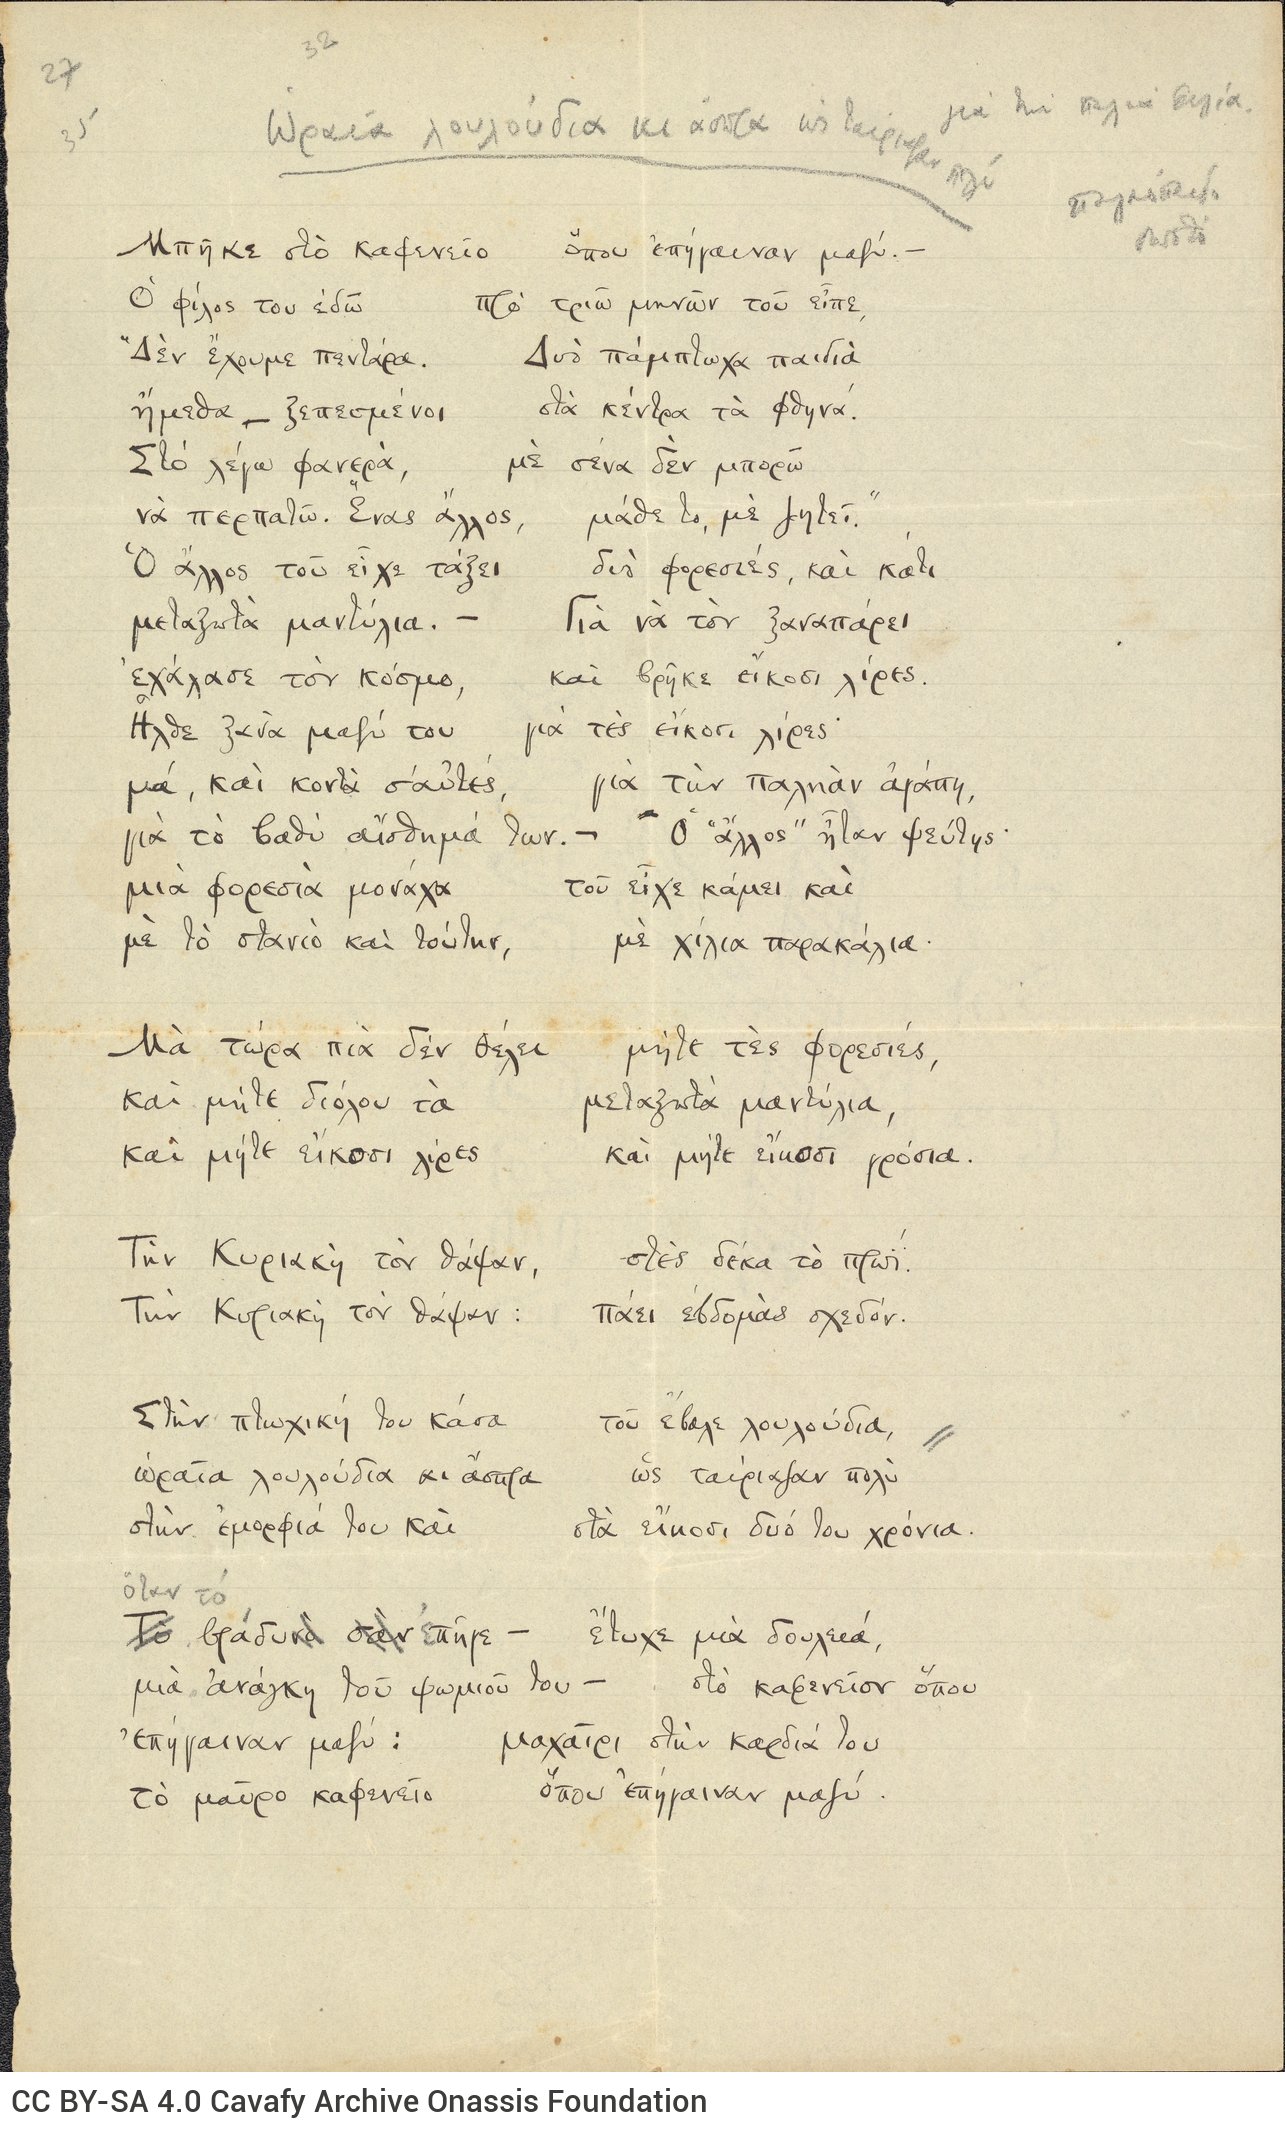 Manuscript of the poem "Beautiful, White Flowers As They Went So Well" on one side of a sheet. In the text margin, handwri